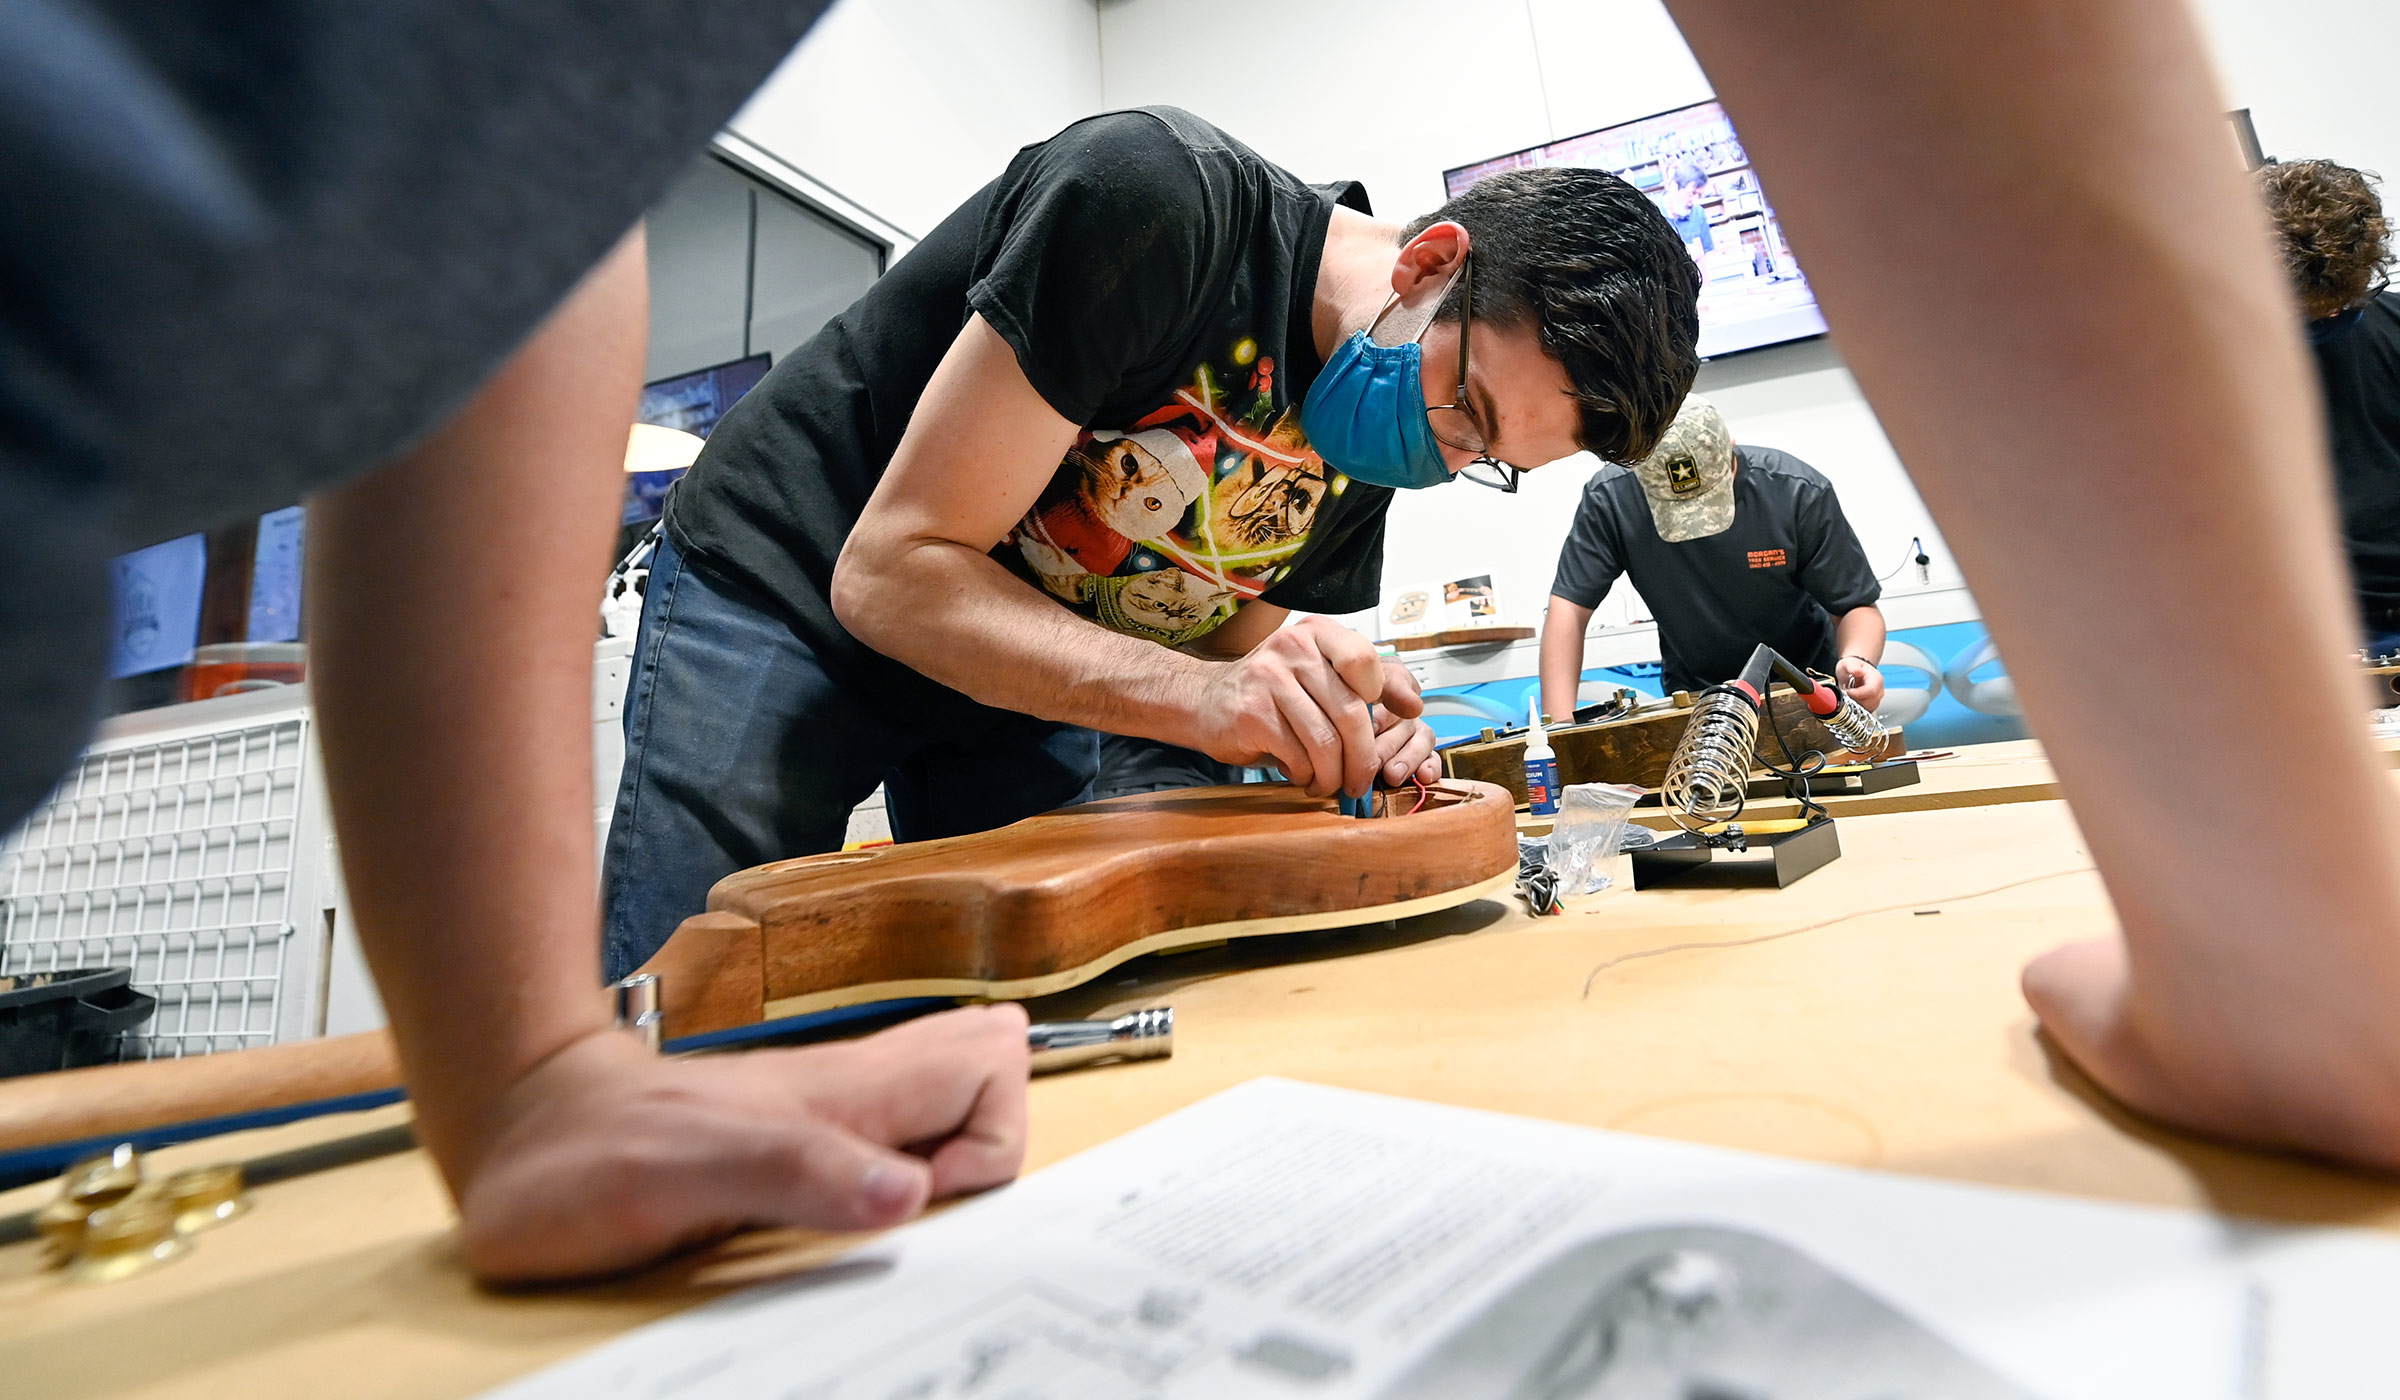 MSU alum and Idea Shop employee Landon Casey works on a guitar, framed by the arms of a participant leaning on the workshop table.